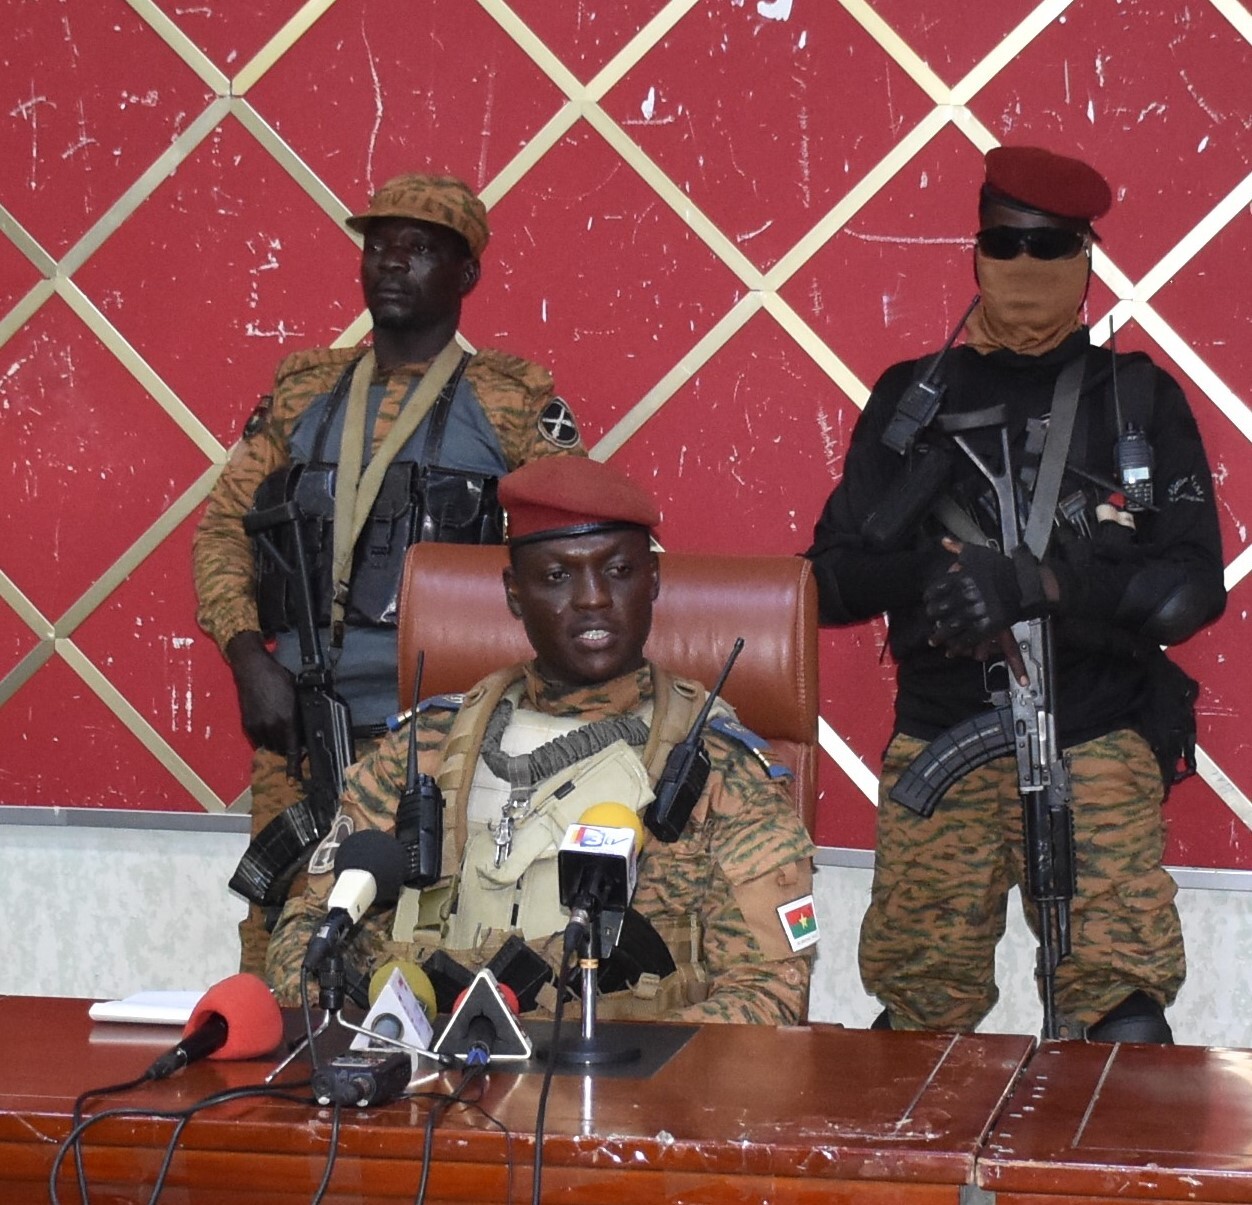 Another coup grips western Africa’s Burkina Faso